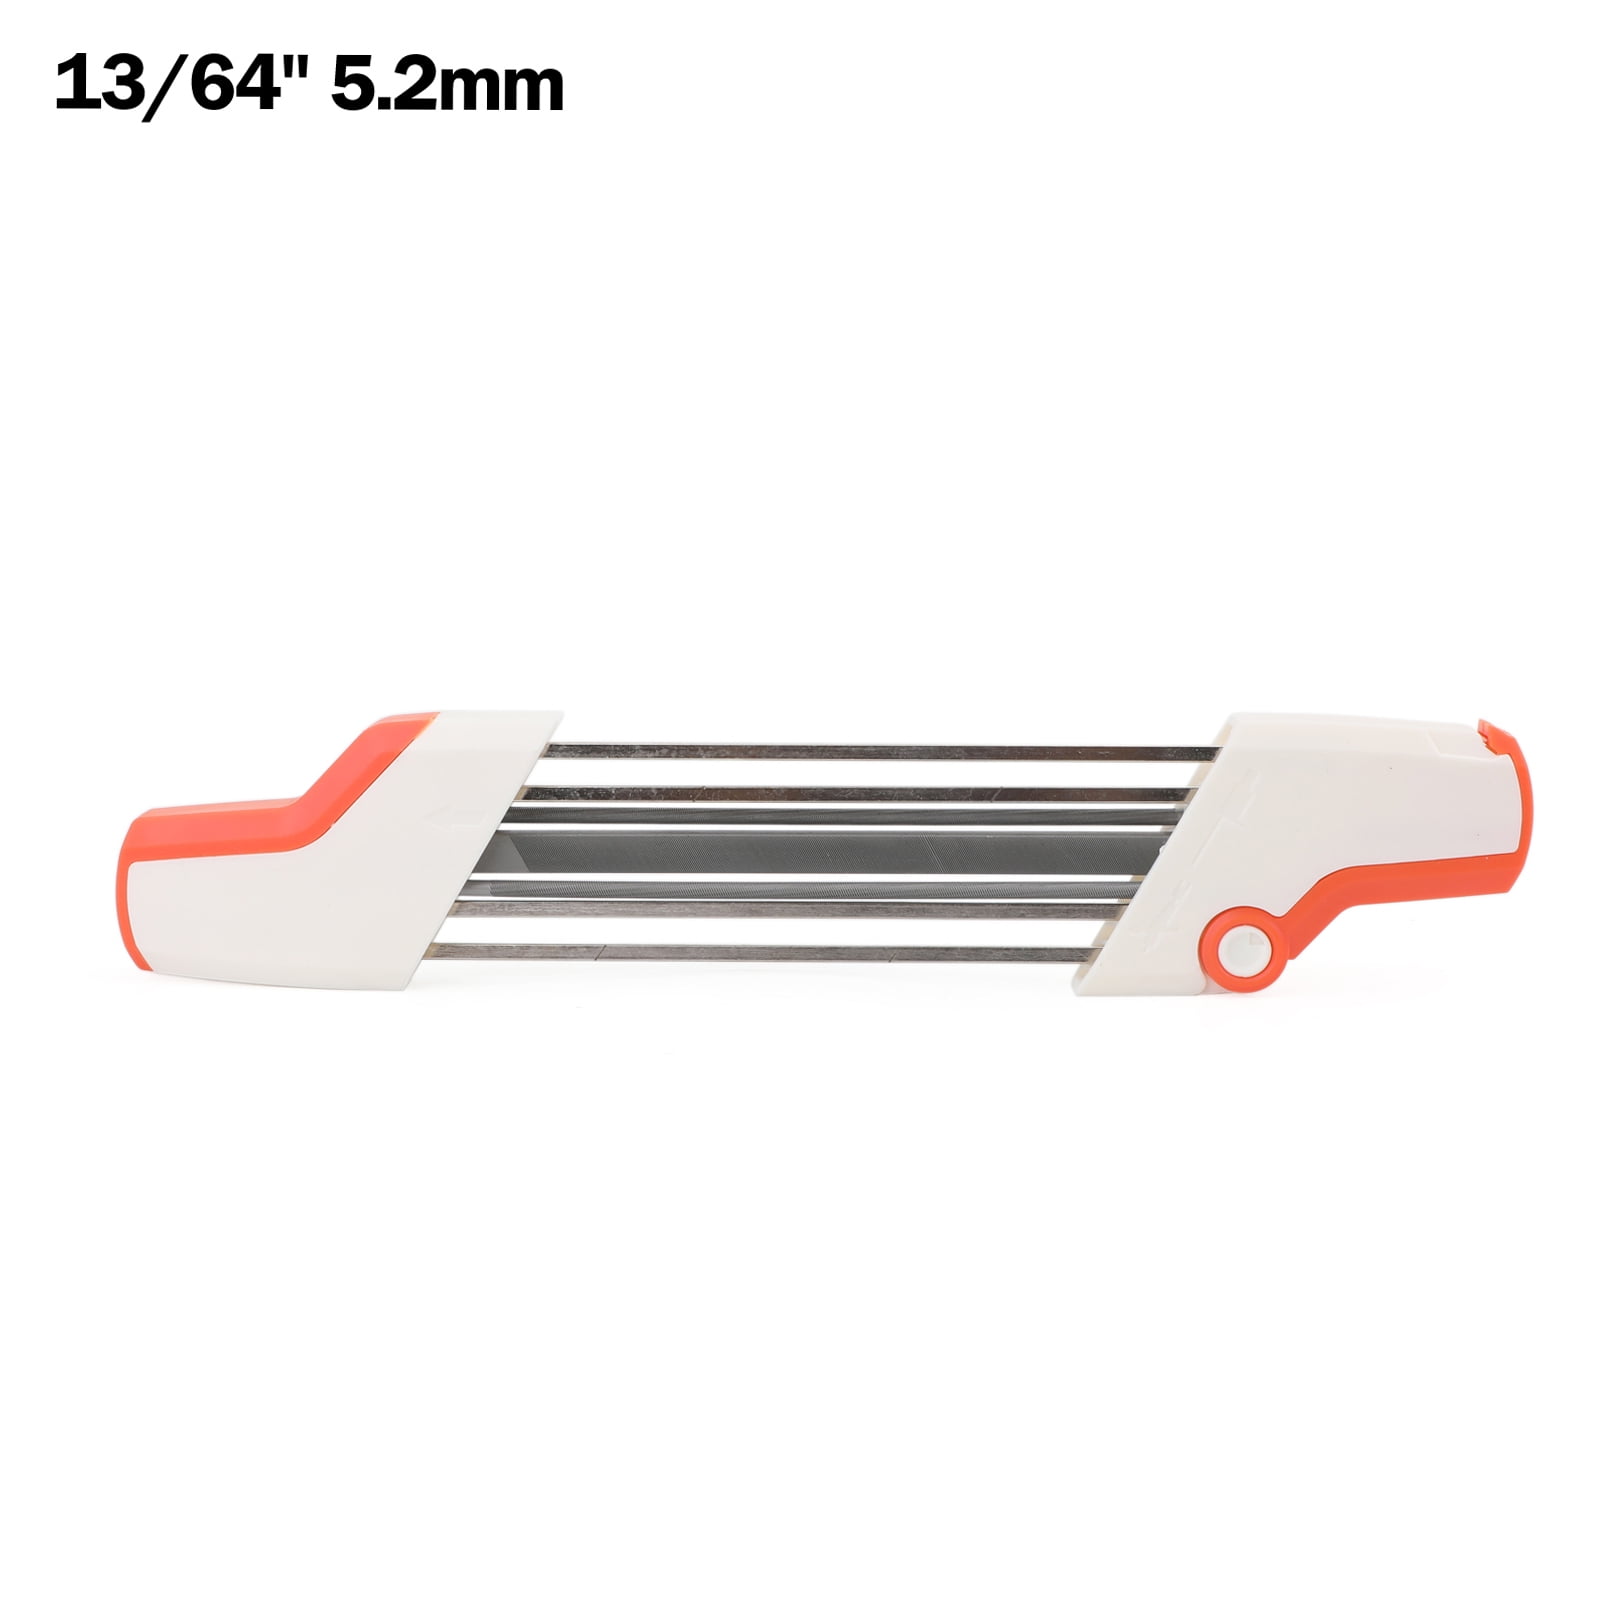 3//8/" 13//64/" 5.2mm 2 IN 1 Easy Chain File Sharpener Replace For Stihl Chainsaw